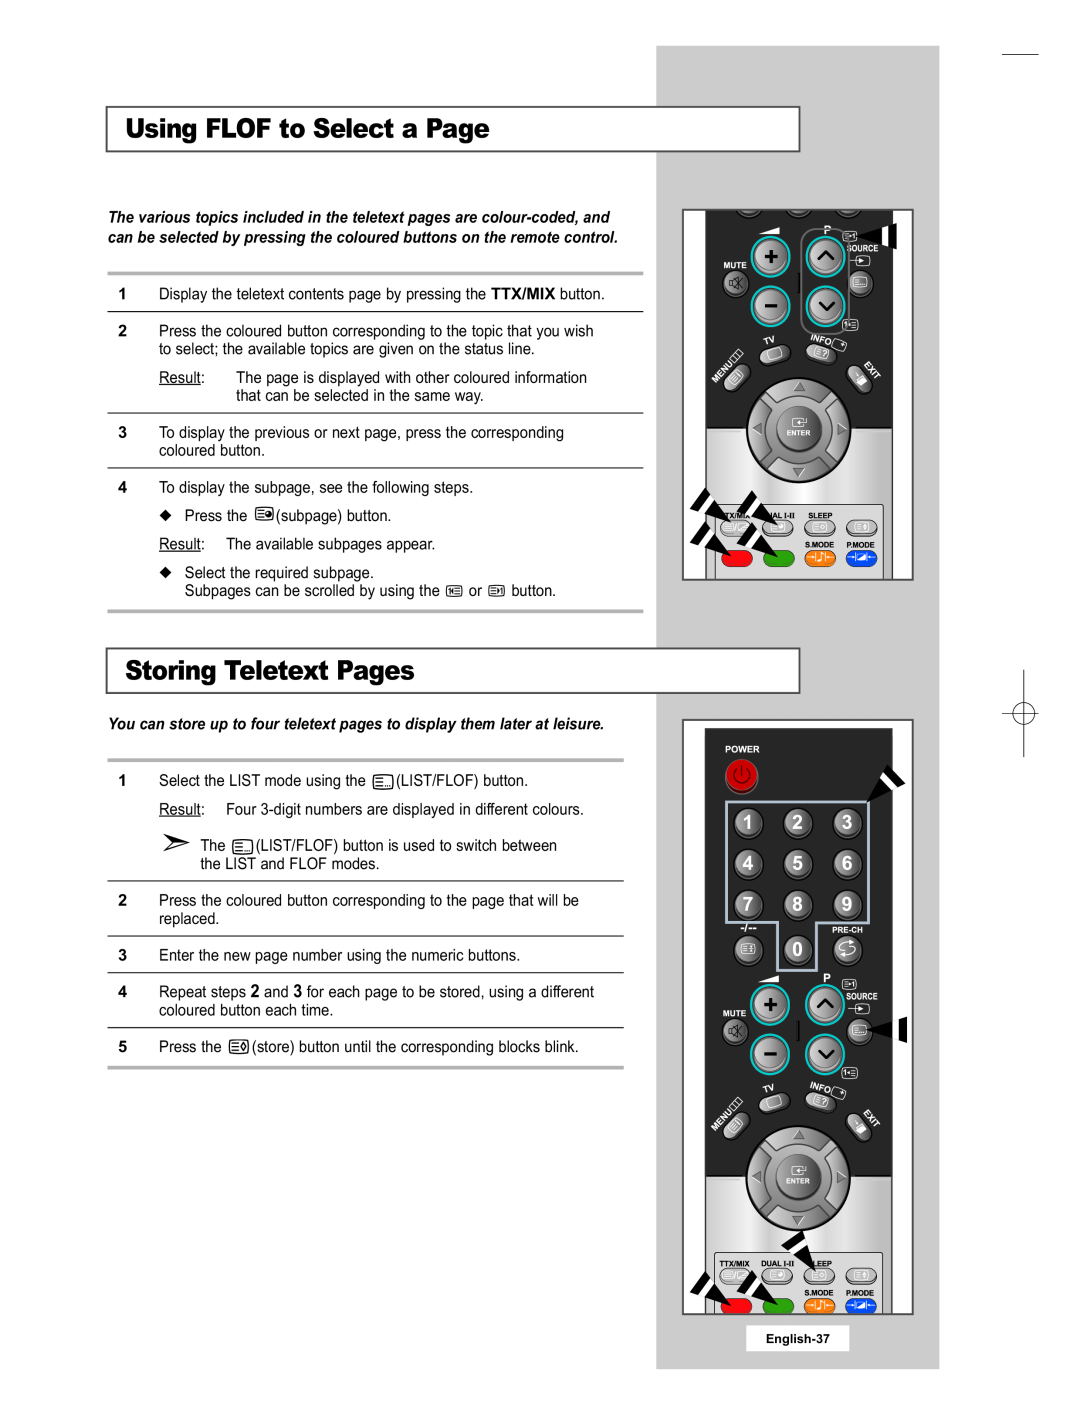 Samsung LE15E31S manual Using FLOF to Select a Page, Storing Teletext Pages 